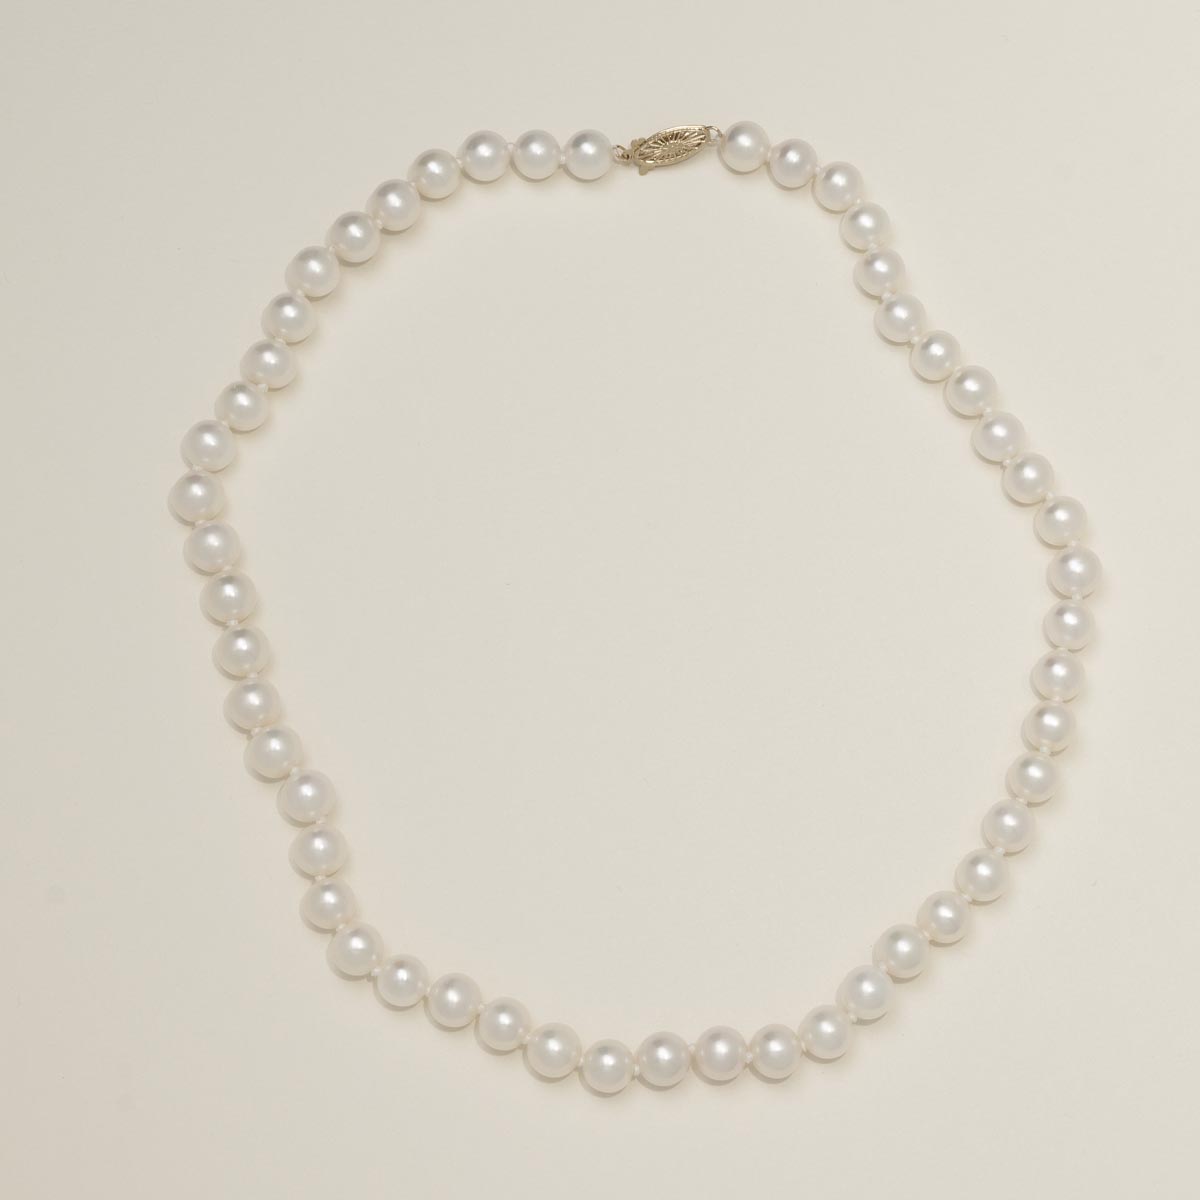 Mastoloni Cultured Freshwater Pearl Strand Necklace in 14kt Yellow Gold (8-8.5mm pearls)